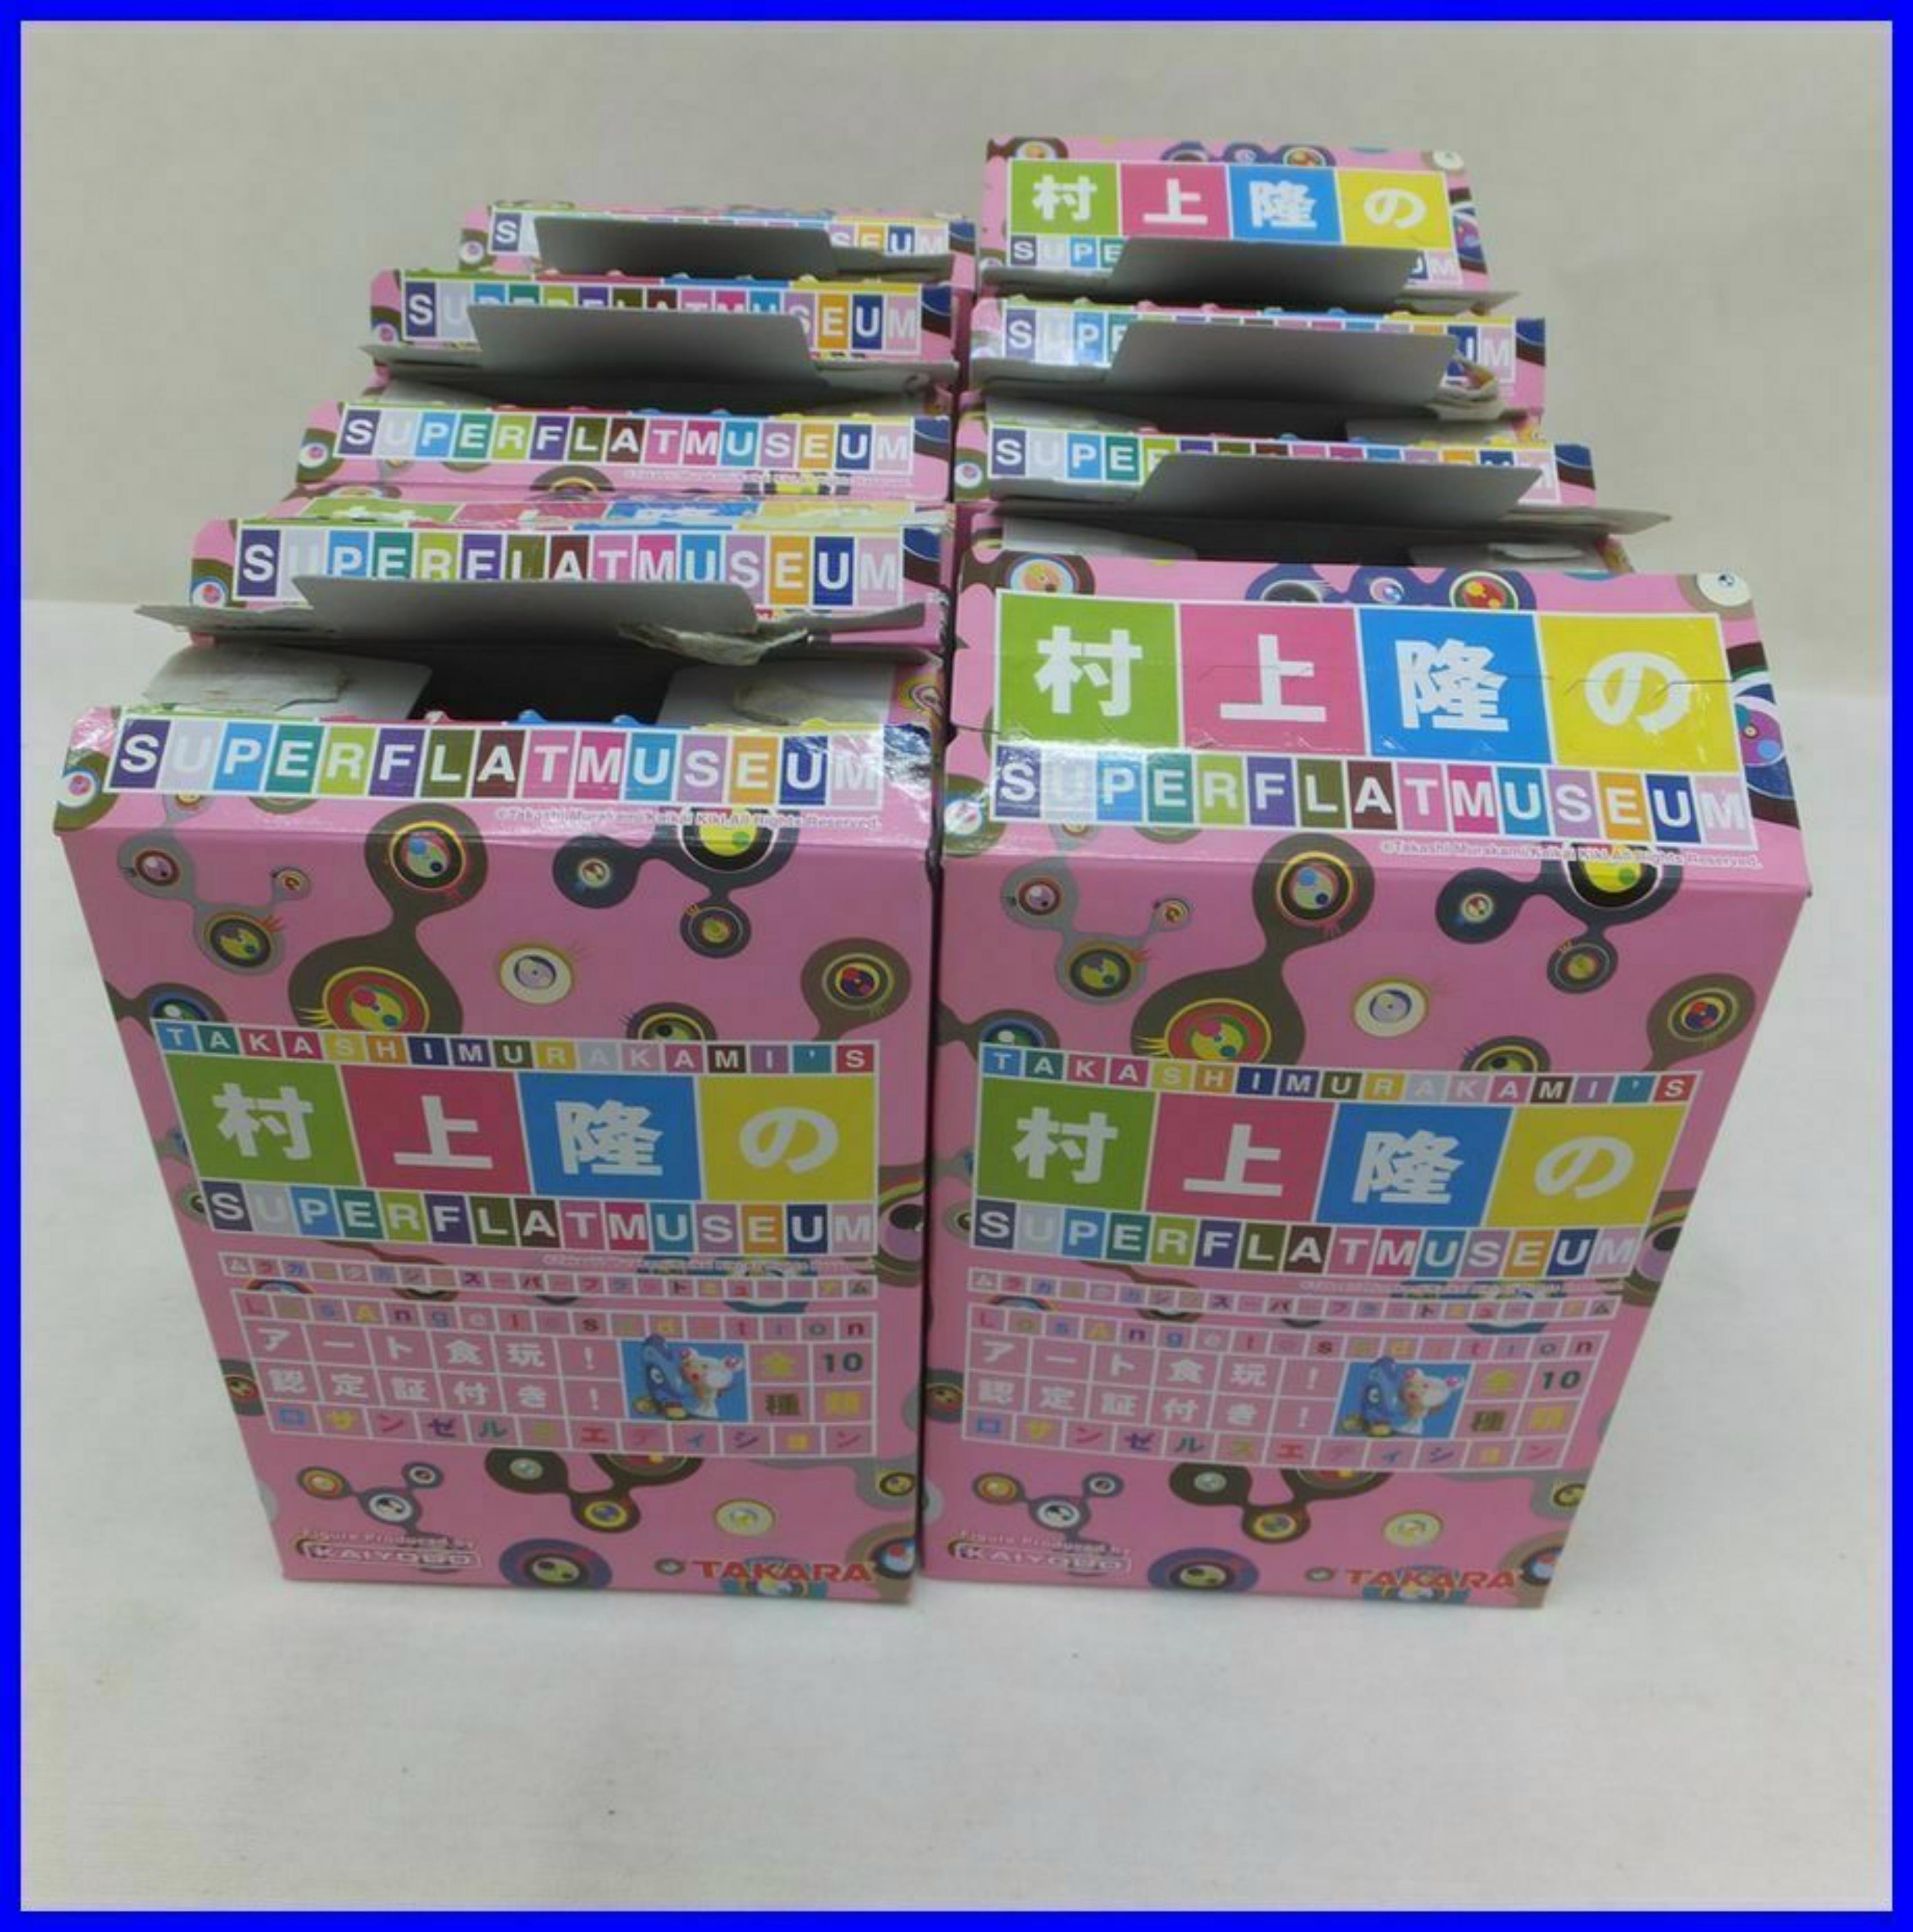 Takashi Murakami
Super Flat Museum Toys (Ten Separate Works in Pink Boxes), 2003
10 separate Plastic toys wrapped in cellophane in original pink card board boxes
5 × 3 1/2 × 1 1/2 inches
Unframed
Printed manufacturer's mark on the boxes. Each work